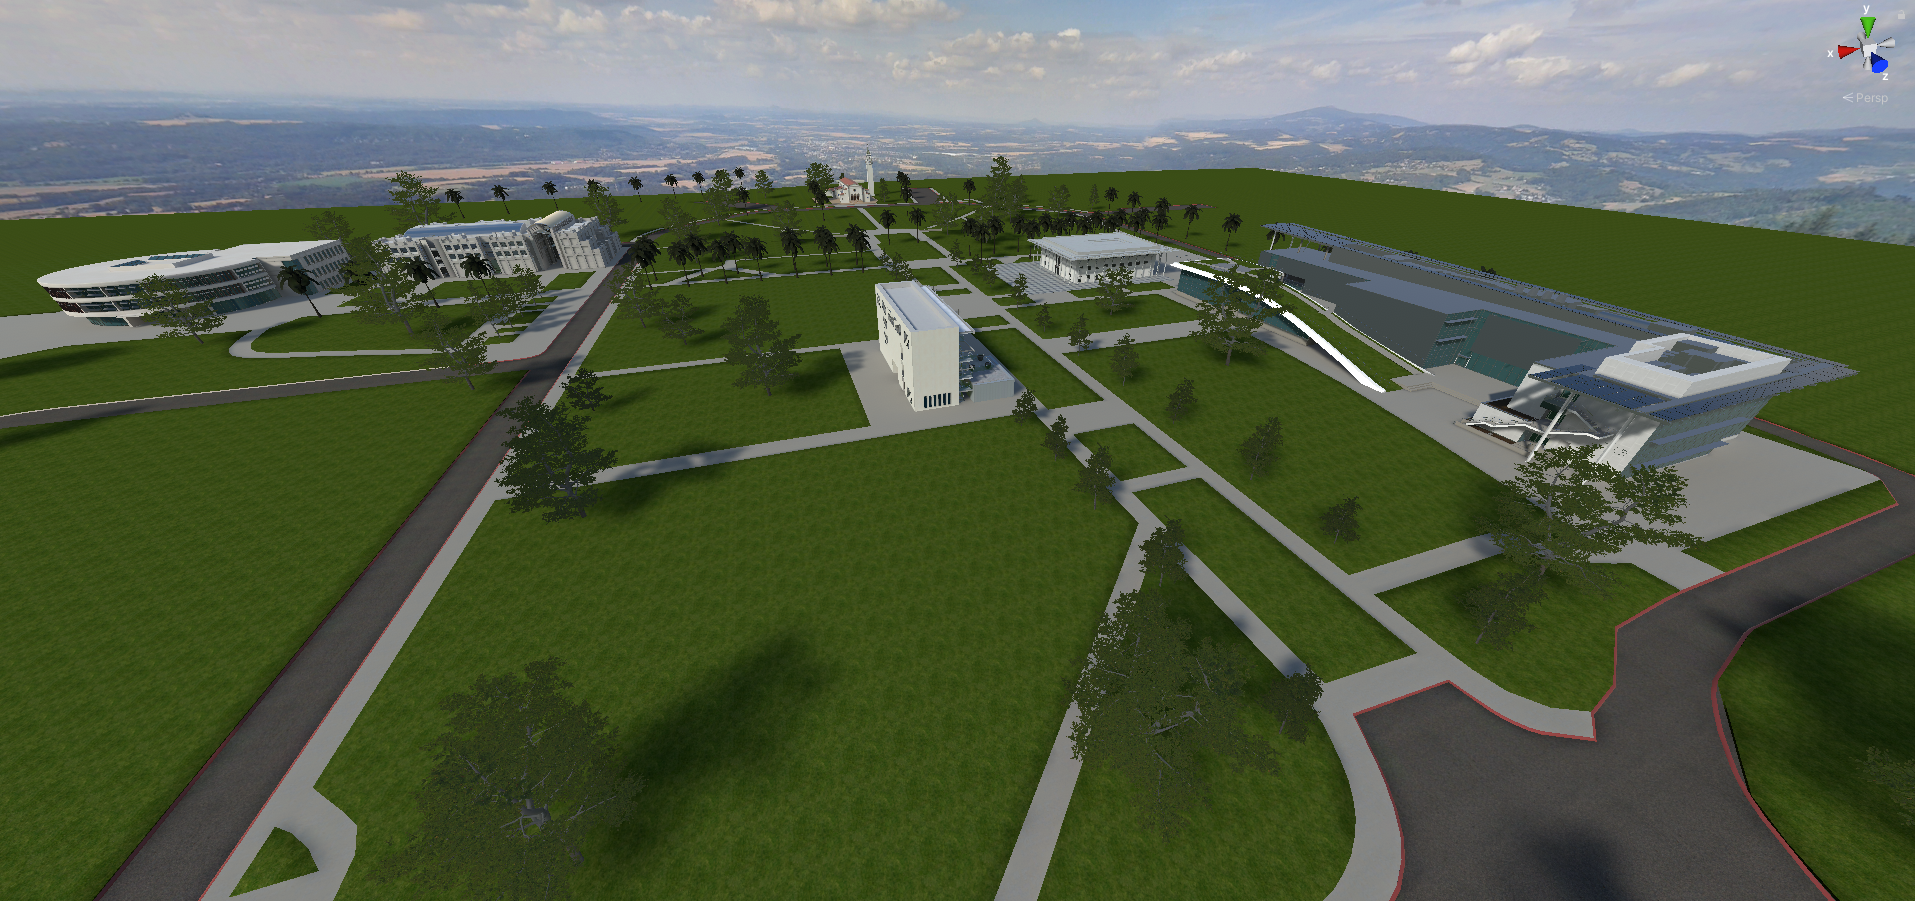 a digital rendering of the LMU campus